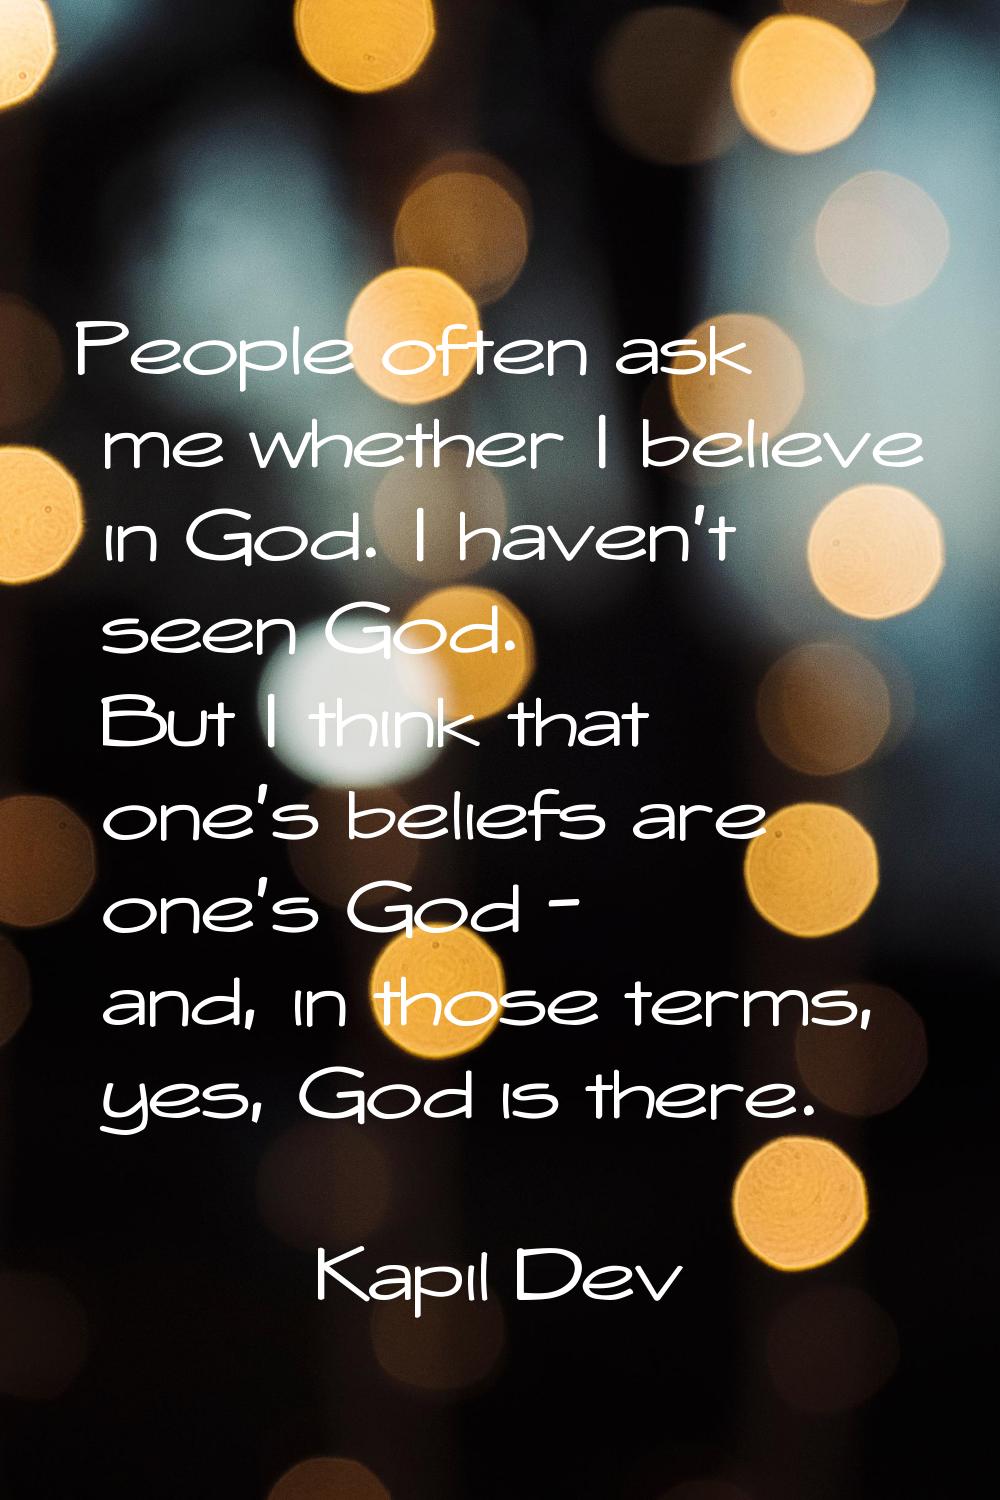 People often ask me whether I believe in God. I haven't seen God. But I think that one's beliefs ar